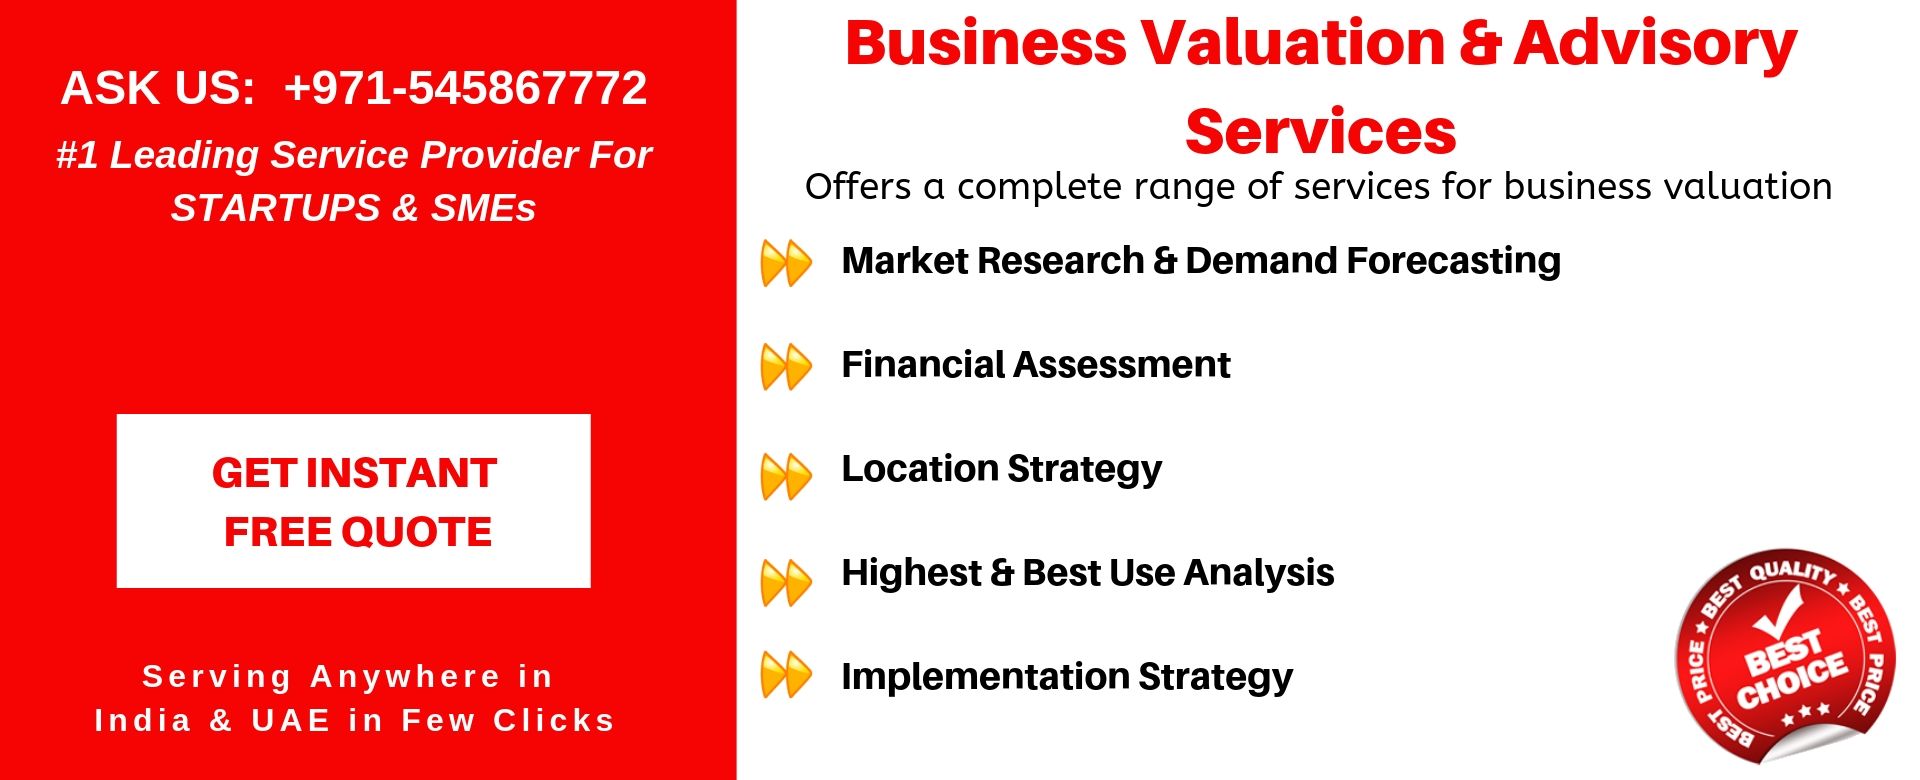 business valuation advisory services in uae